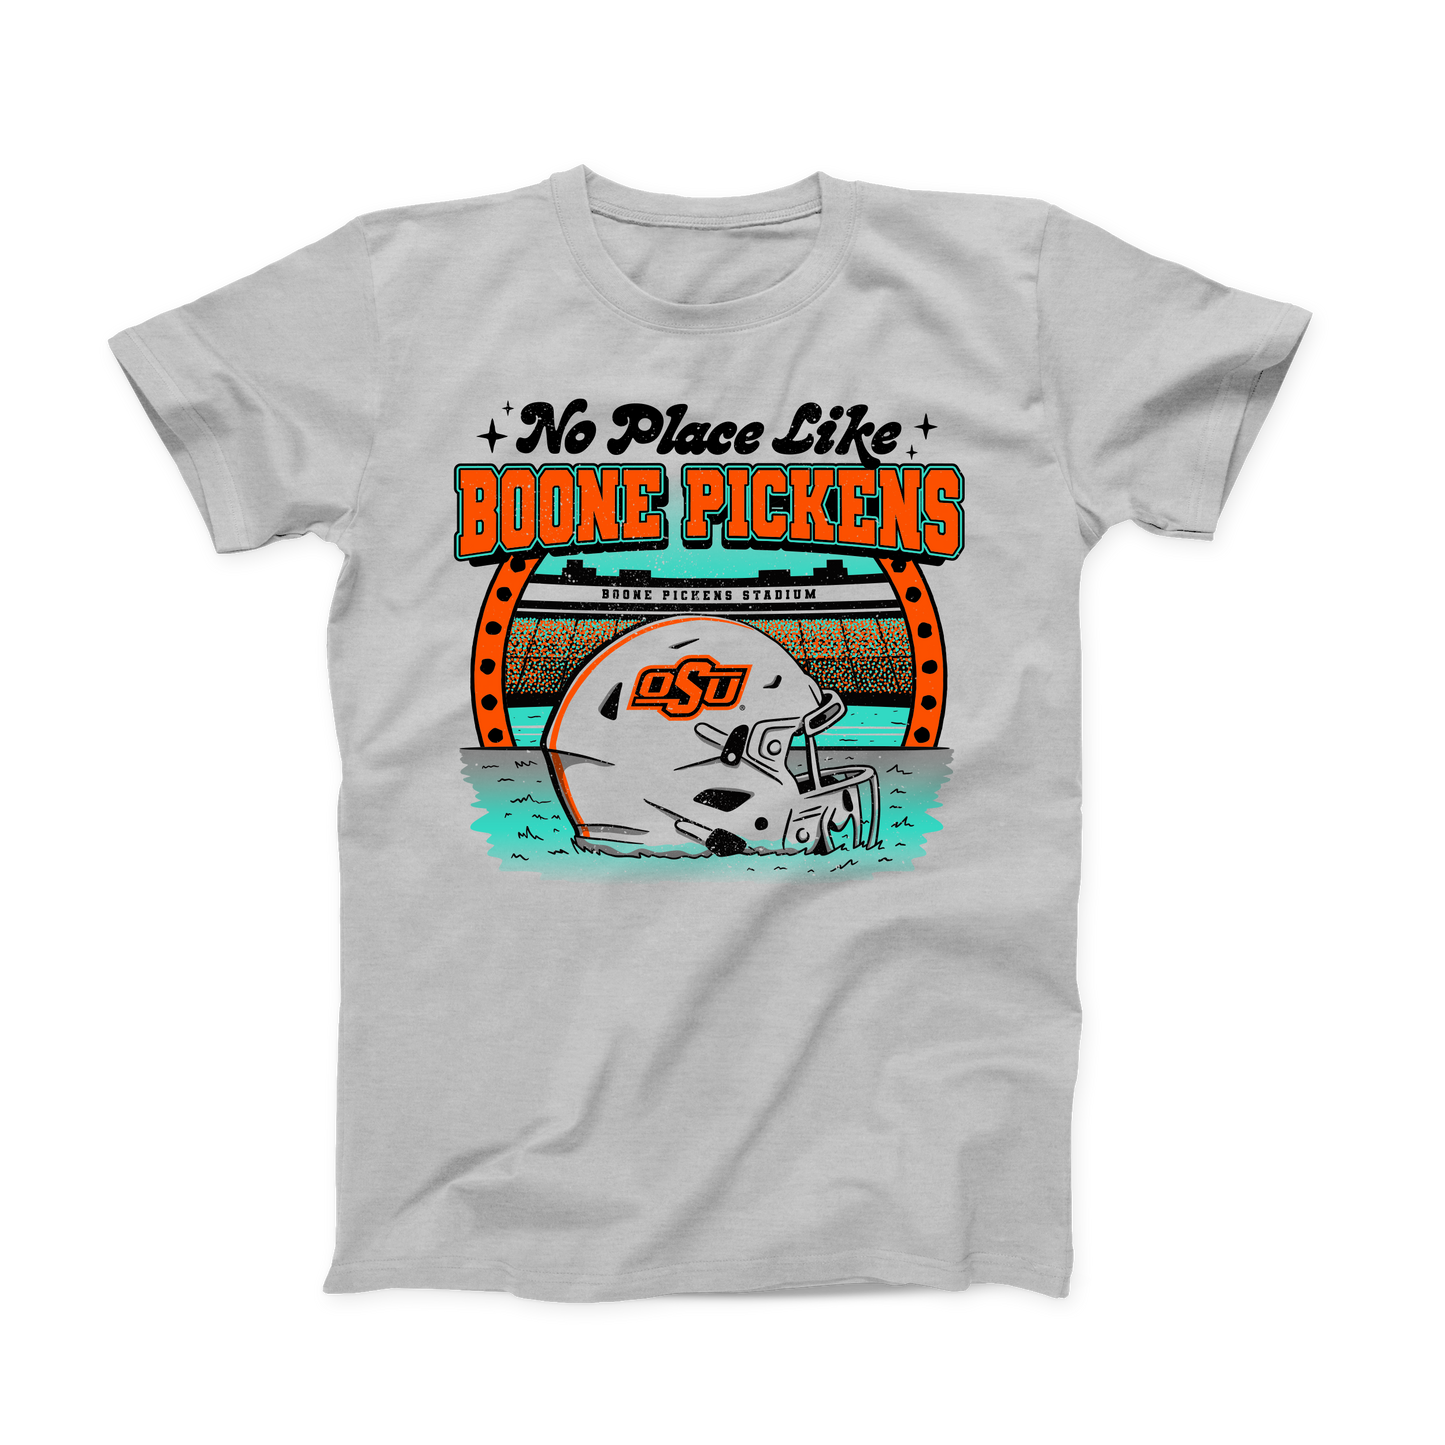 Silver Grey OSU Football T-shirt. "No Place Like" in Black font at the top. "Boone Pickens" in bold orange font below that. Stadium and OSU Football helmet under the words. Whole design in teal, orange and black.